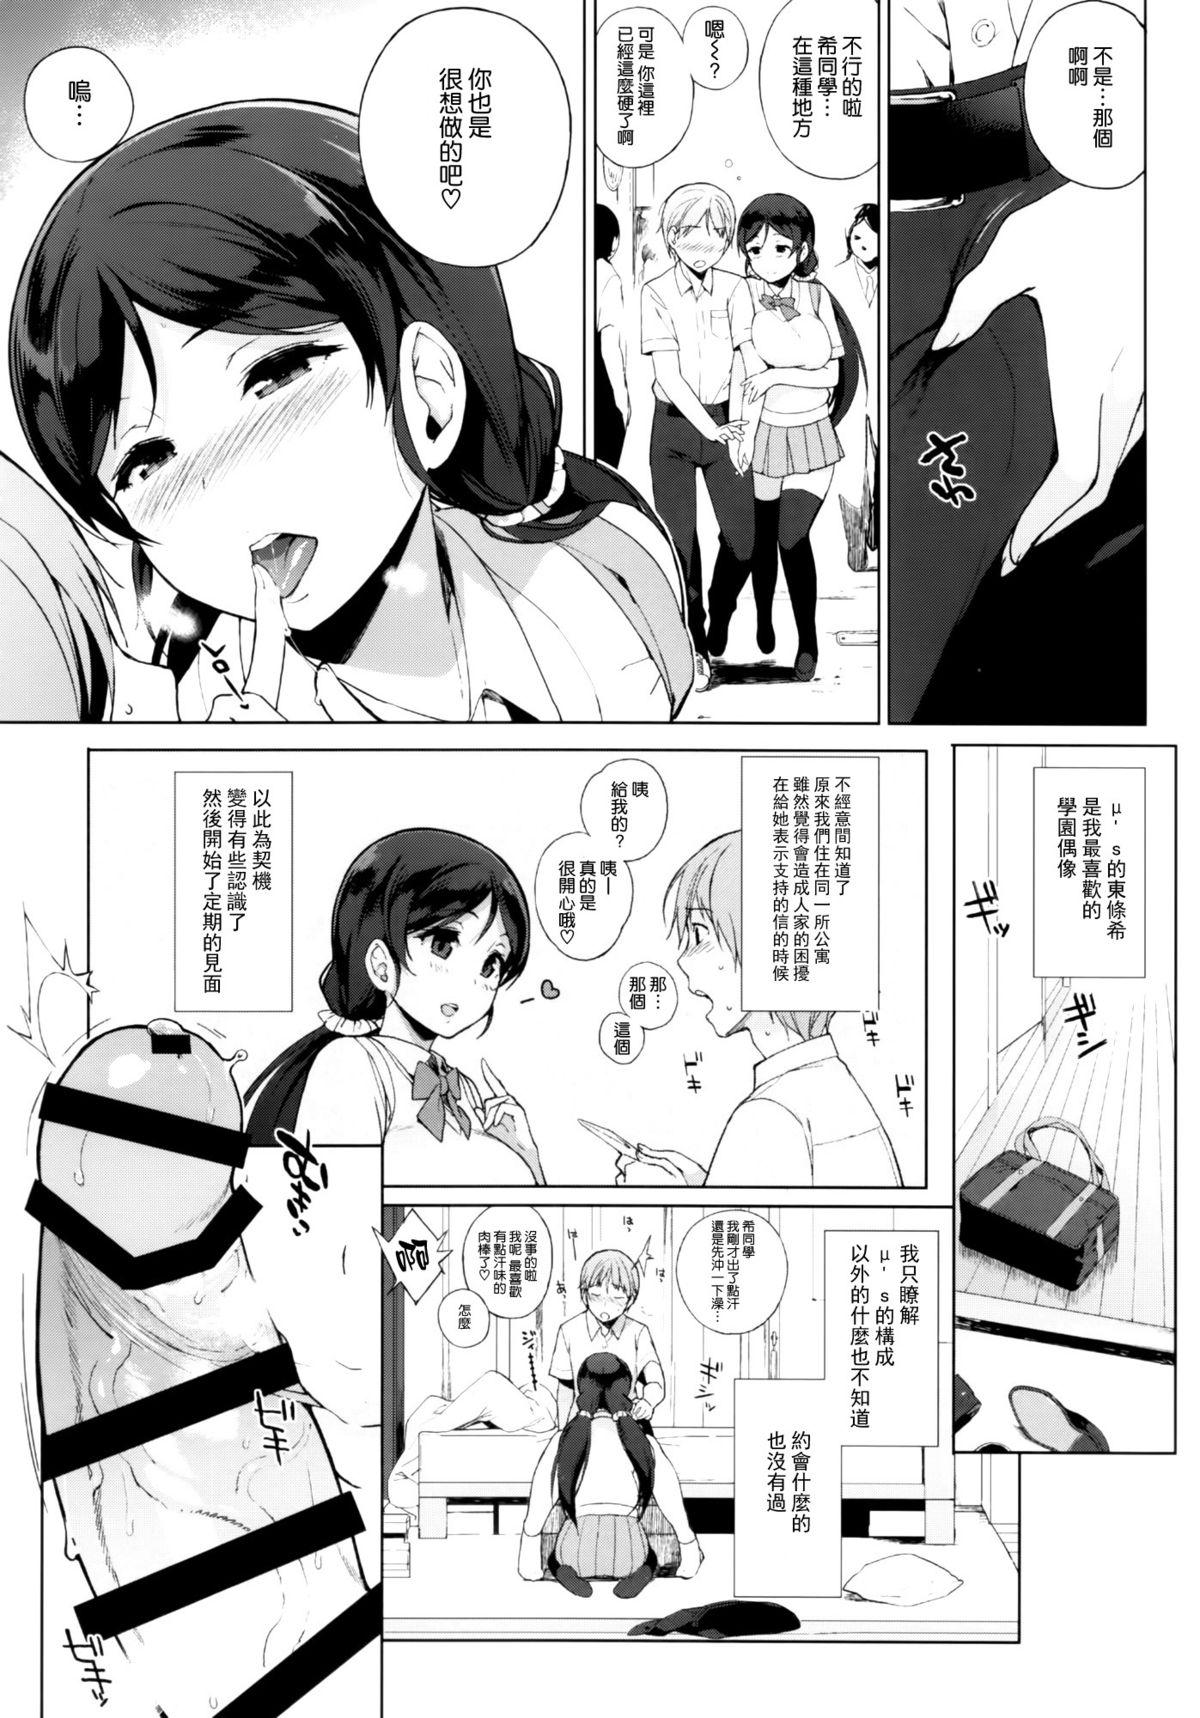 Self NOZOMYSTERY - Love live Ex Girlfriend - Page 5